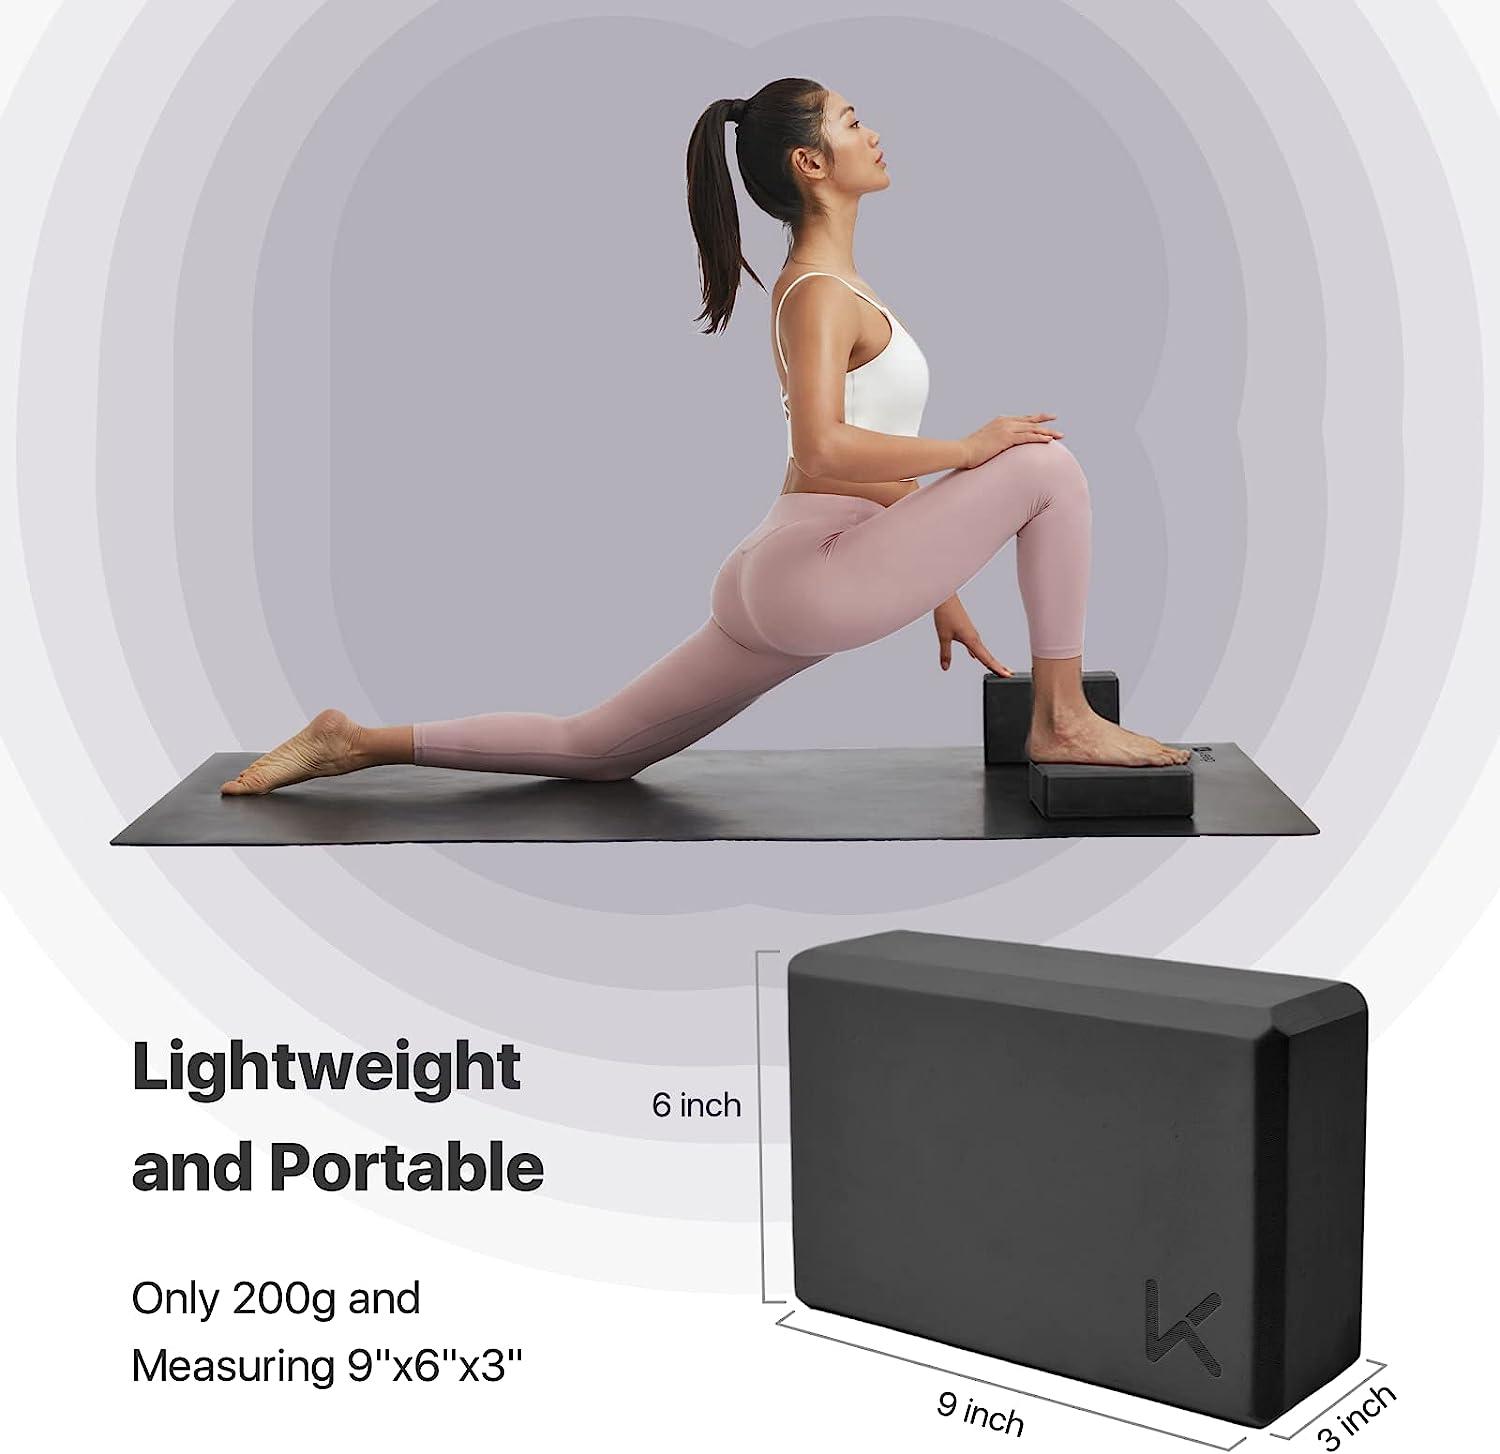 REEHUT Yoga Blocks,High Density EVA Foam Blocks to Support and Deepen  Poses, Improve Strength and Aid Balance and Flexibility - Lightweight, Odor  Resistant